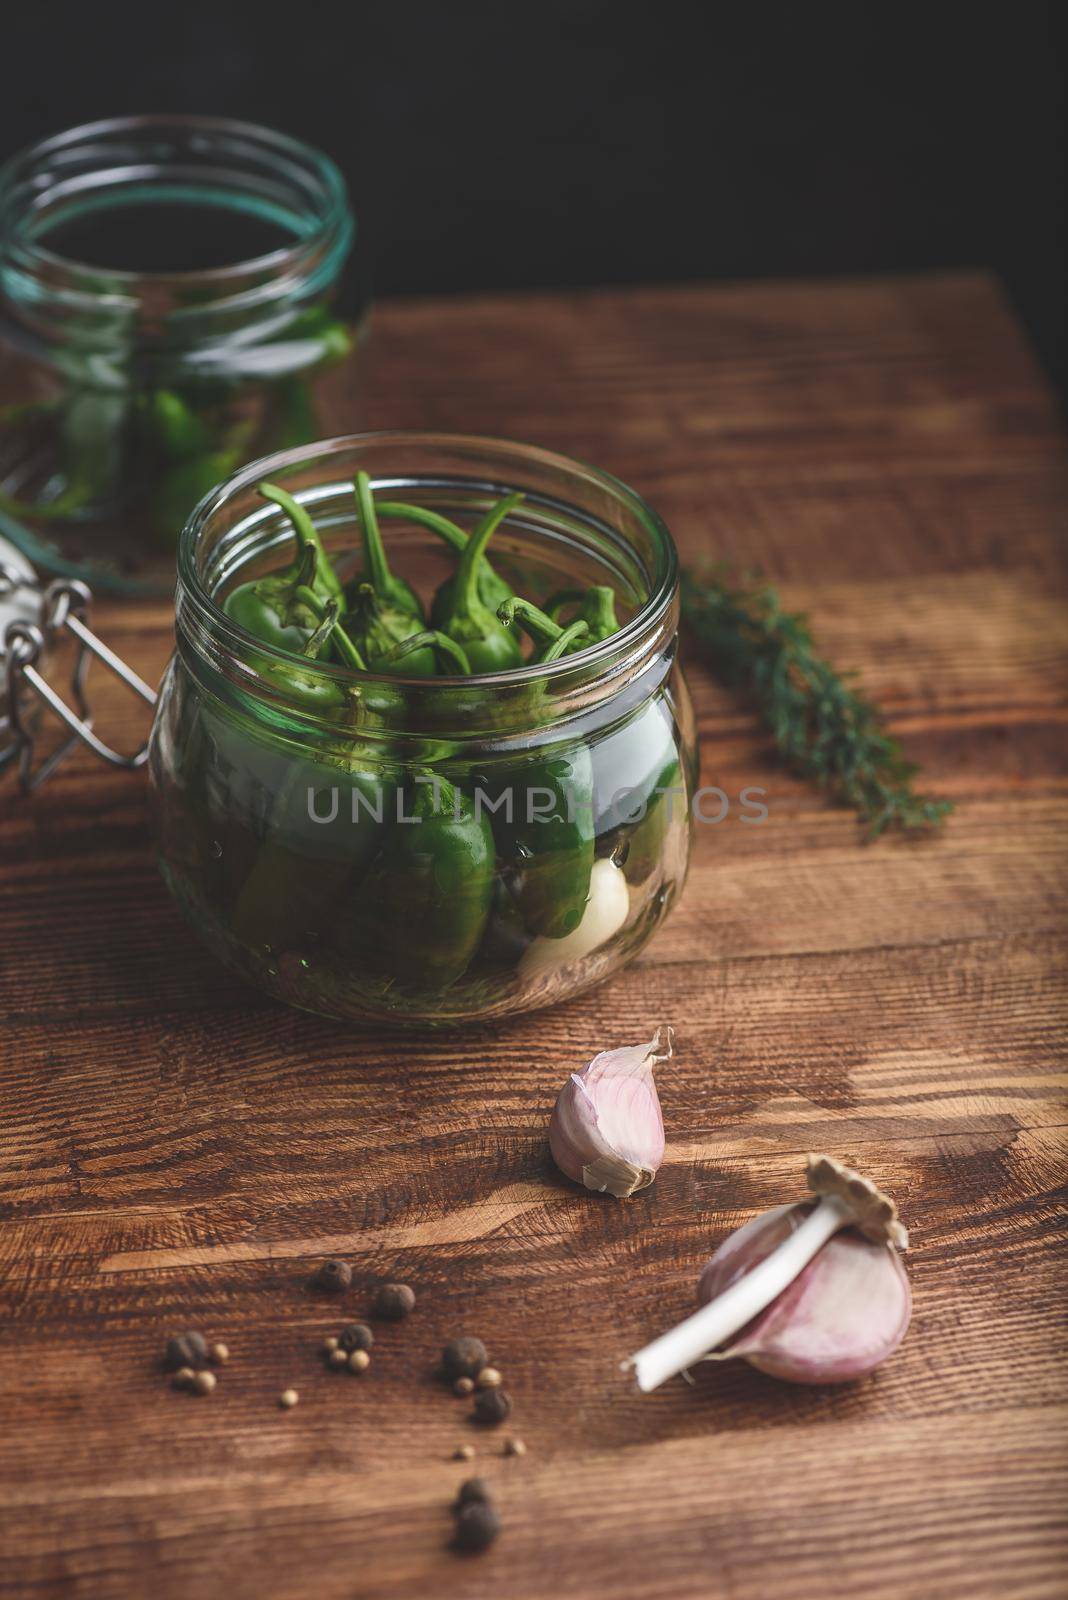 Fresh Jalapeno Peppers in a Glass Jar for Pickling with Spices on Wooden Table. Copy Space